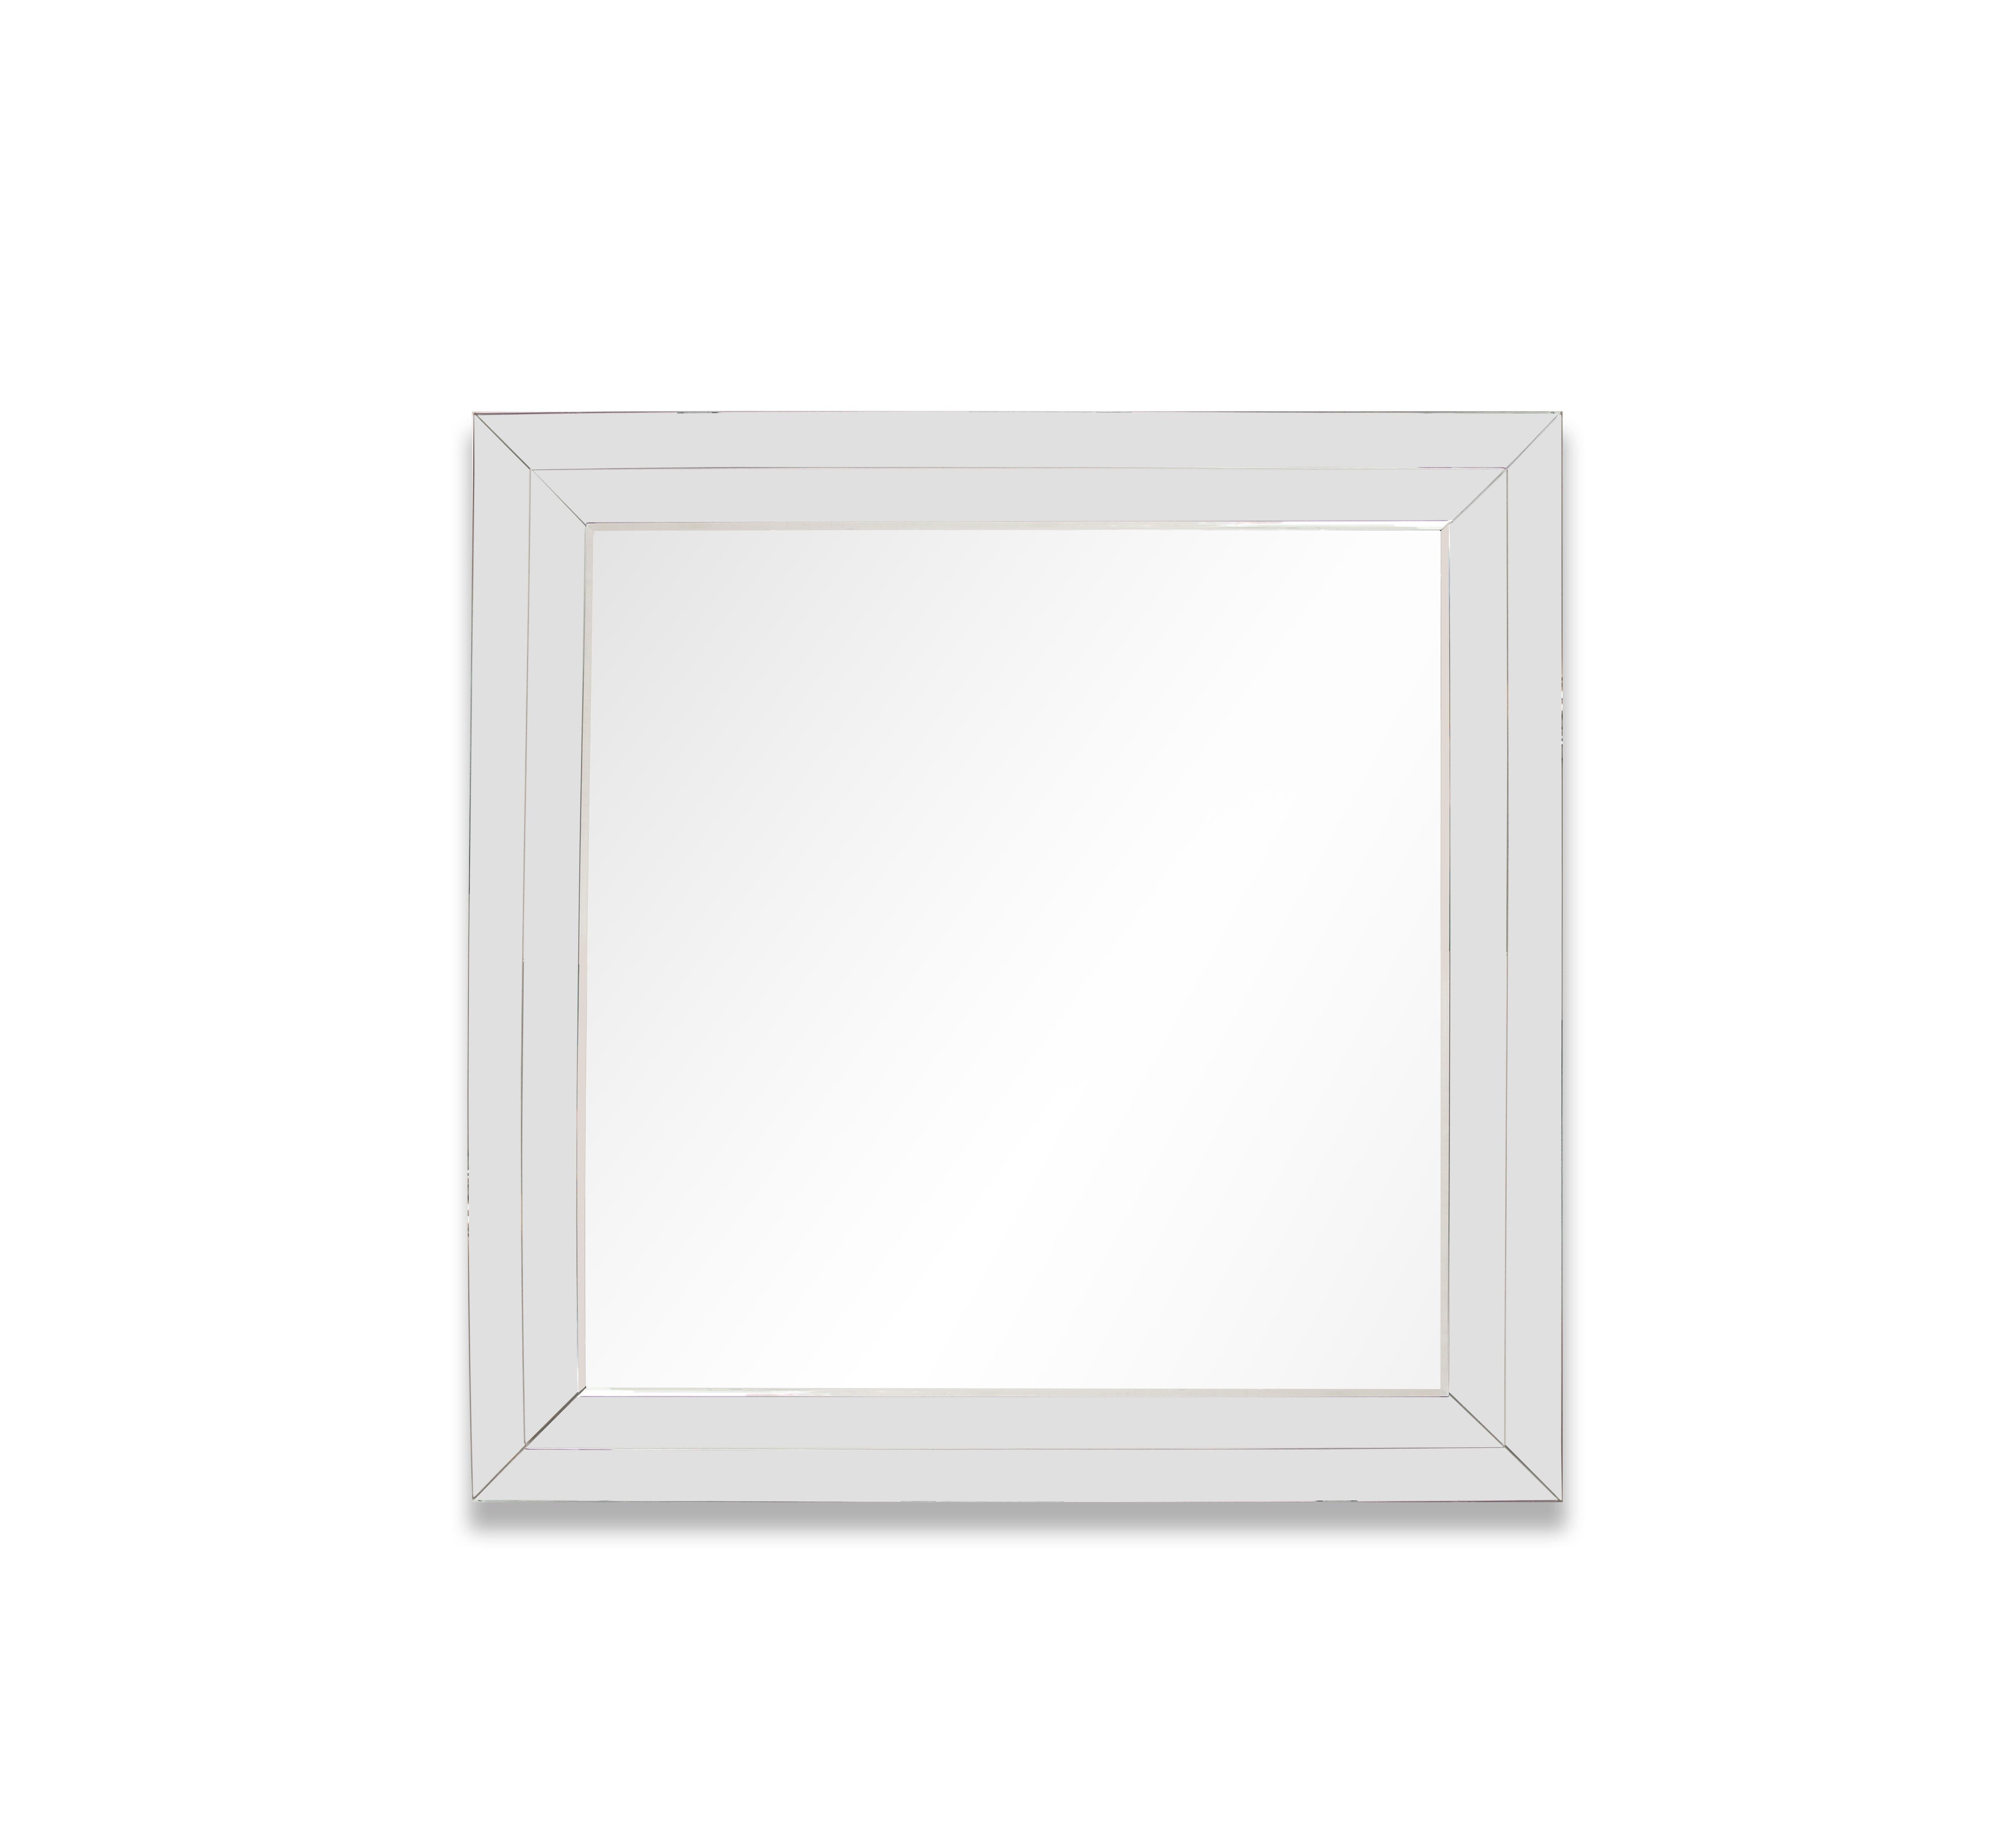 Chic and modern square stacked mirror, designed by Venfield. Mirrored on all sides, and 1/4